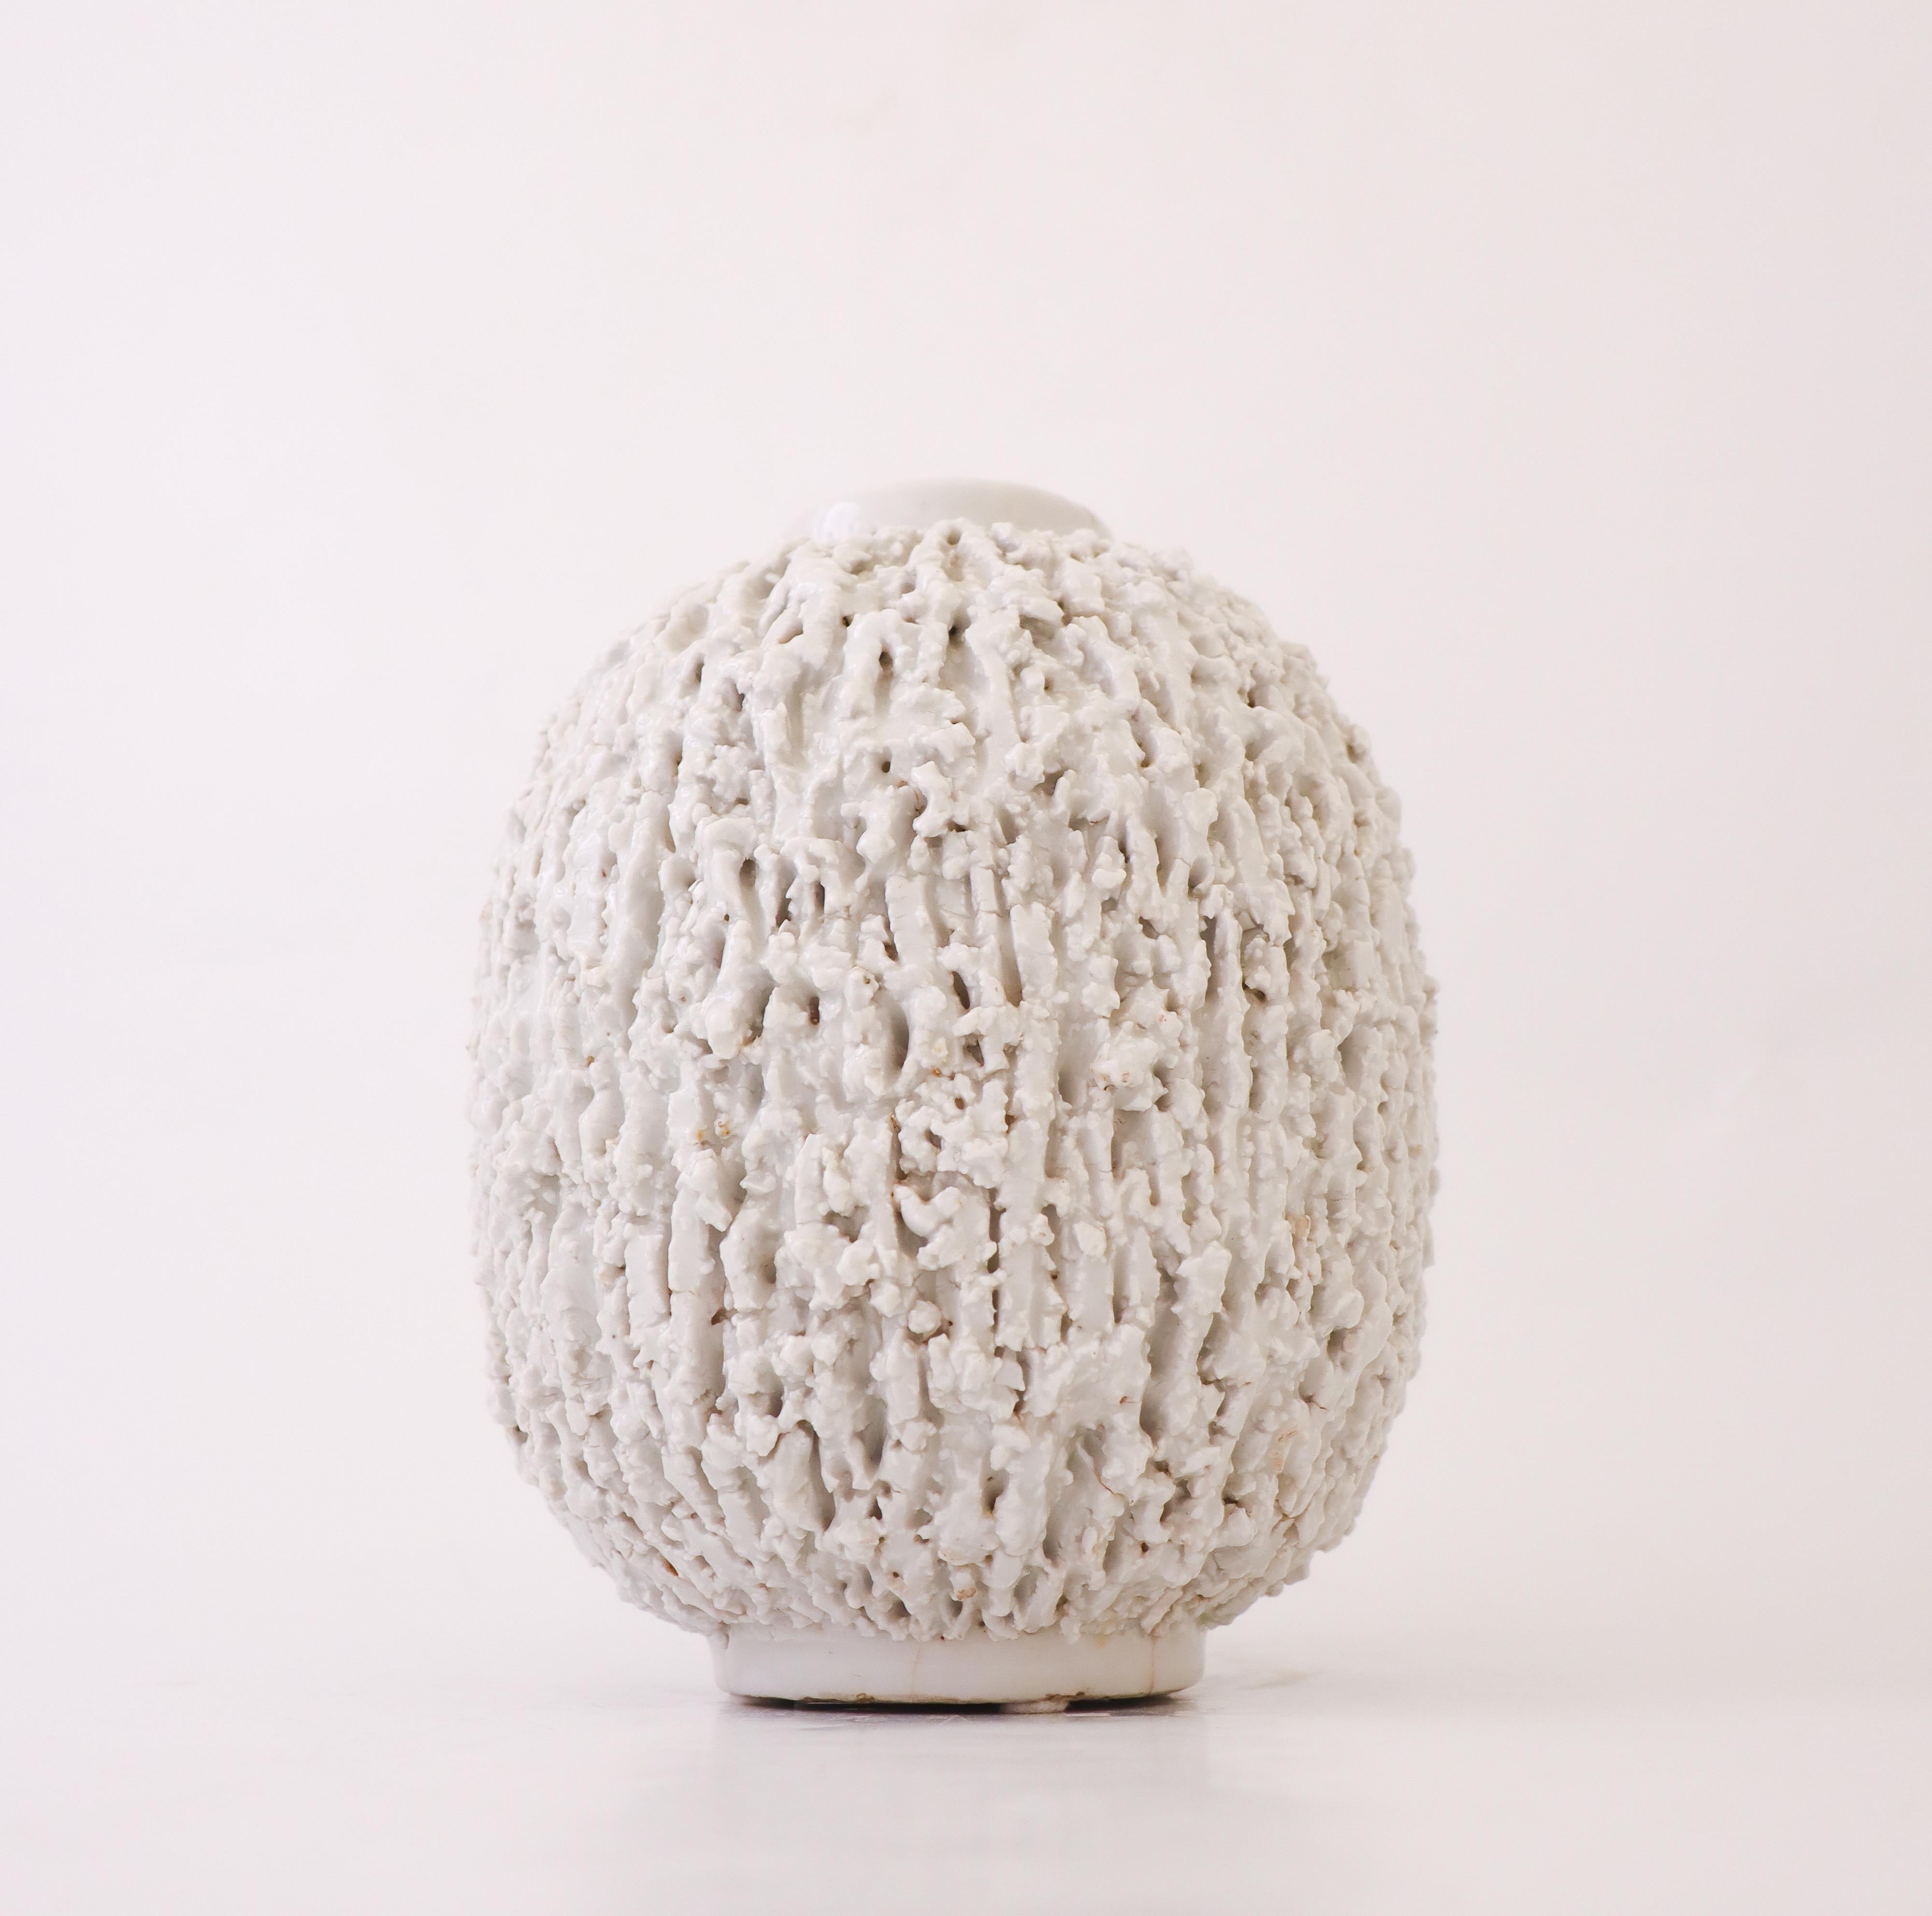 A large, white Hedgehog-vase designed by Gunnar Nylund at Rörstrand. It is 21 cm (8.4